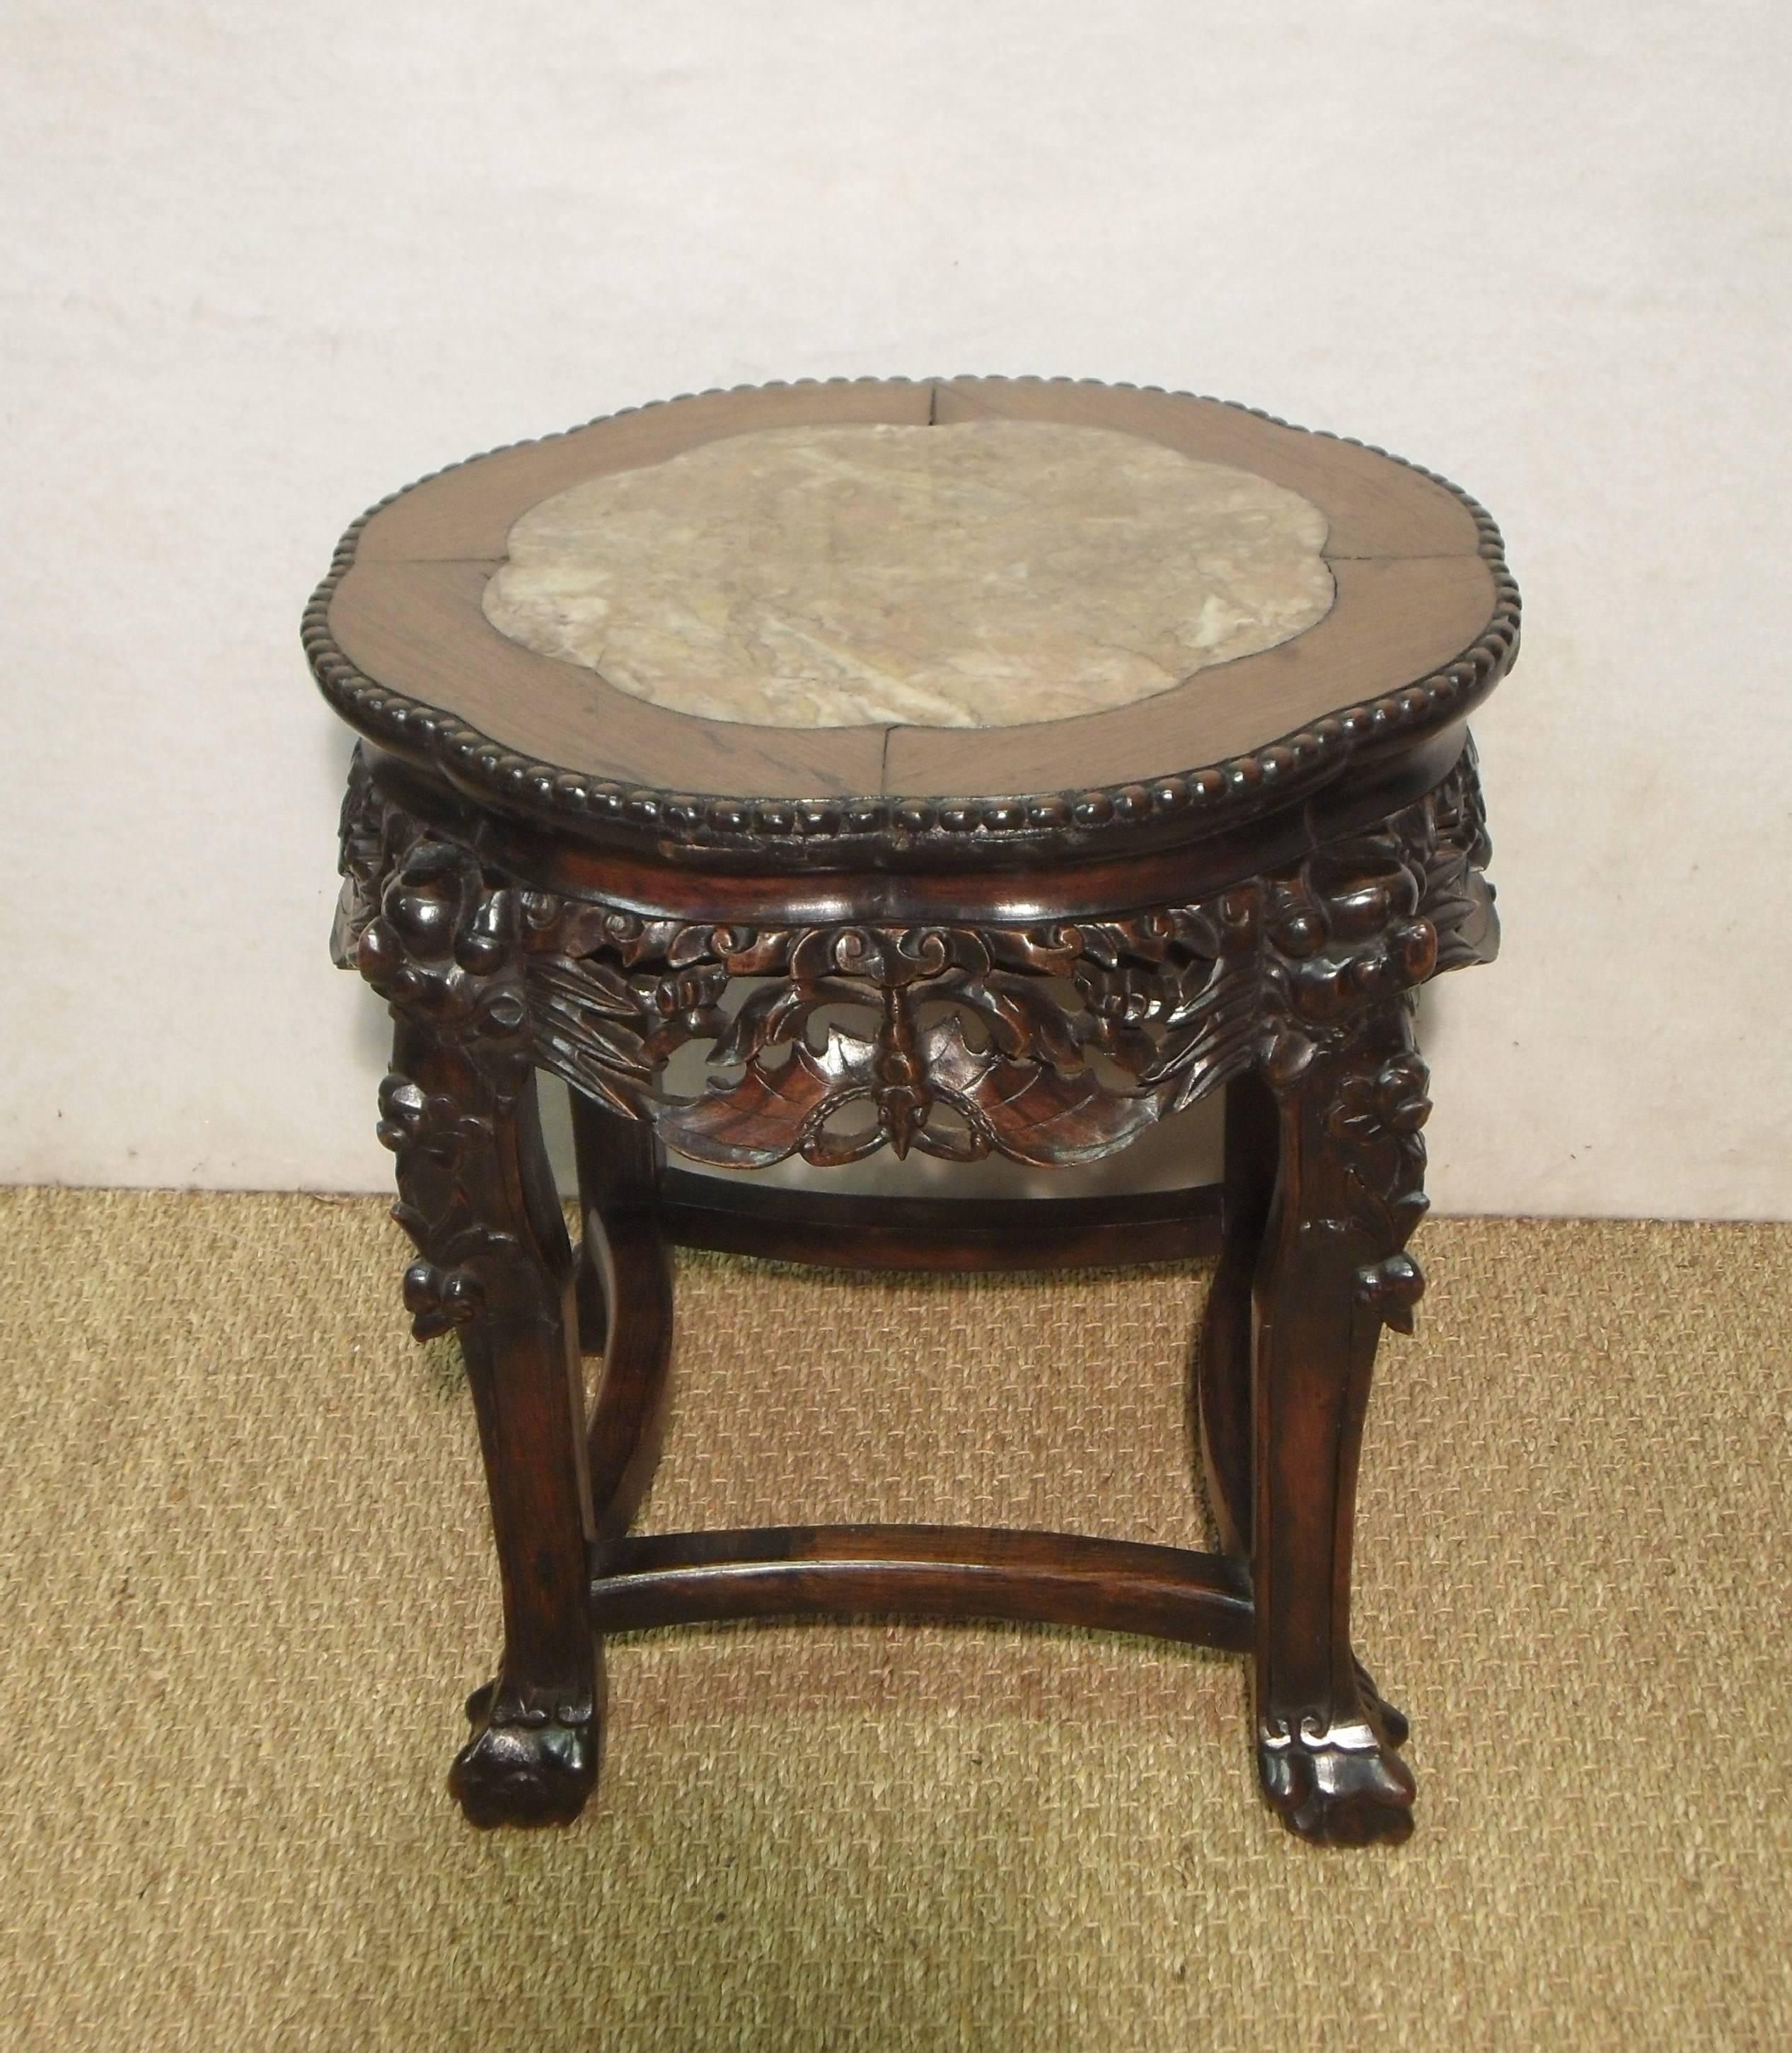 An extremely good quality Chinese rosewood stand or table carved with bats to the frieze and dragons to the legs finishing into a ball and claw foot. The Stand still retains its original inset marble top with carved beaded edge.